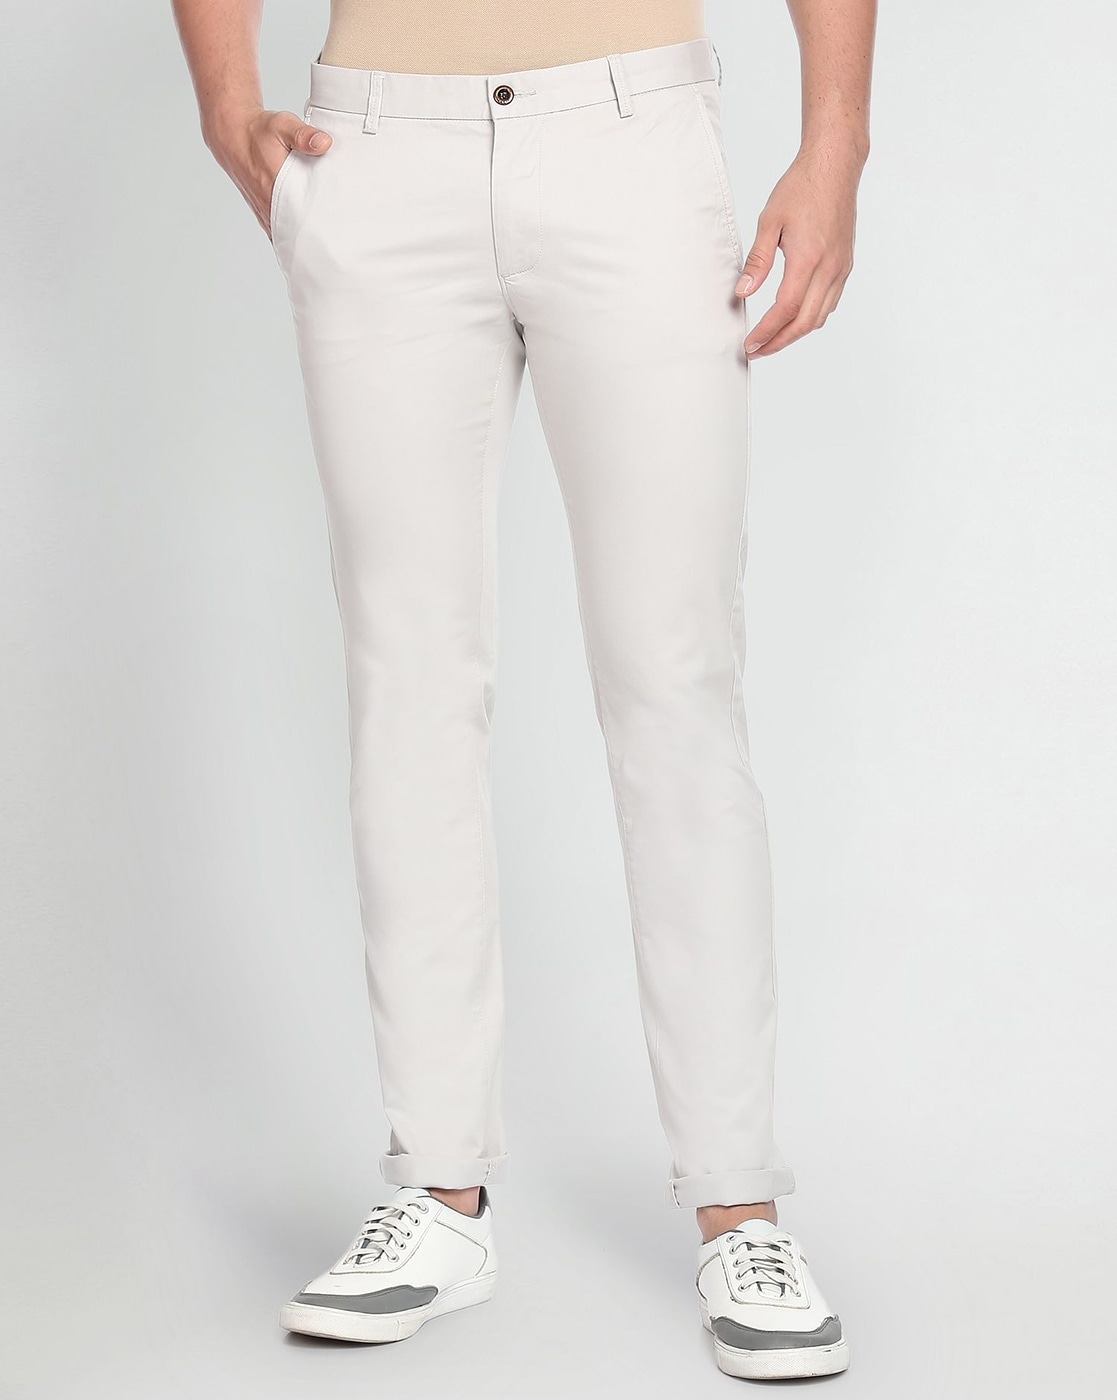 Arrow Jeans in Ludhiana at best price by Arrow Store  Justdial